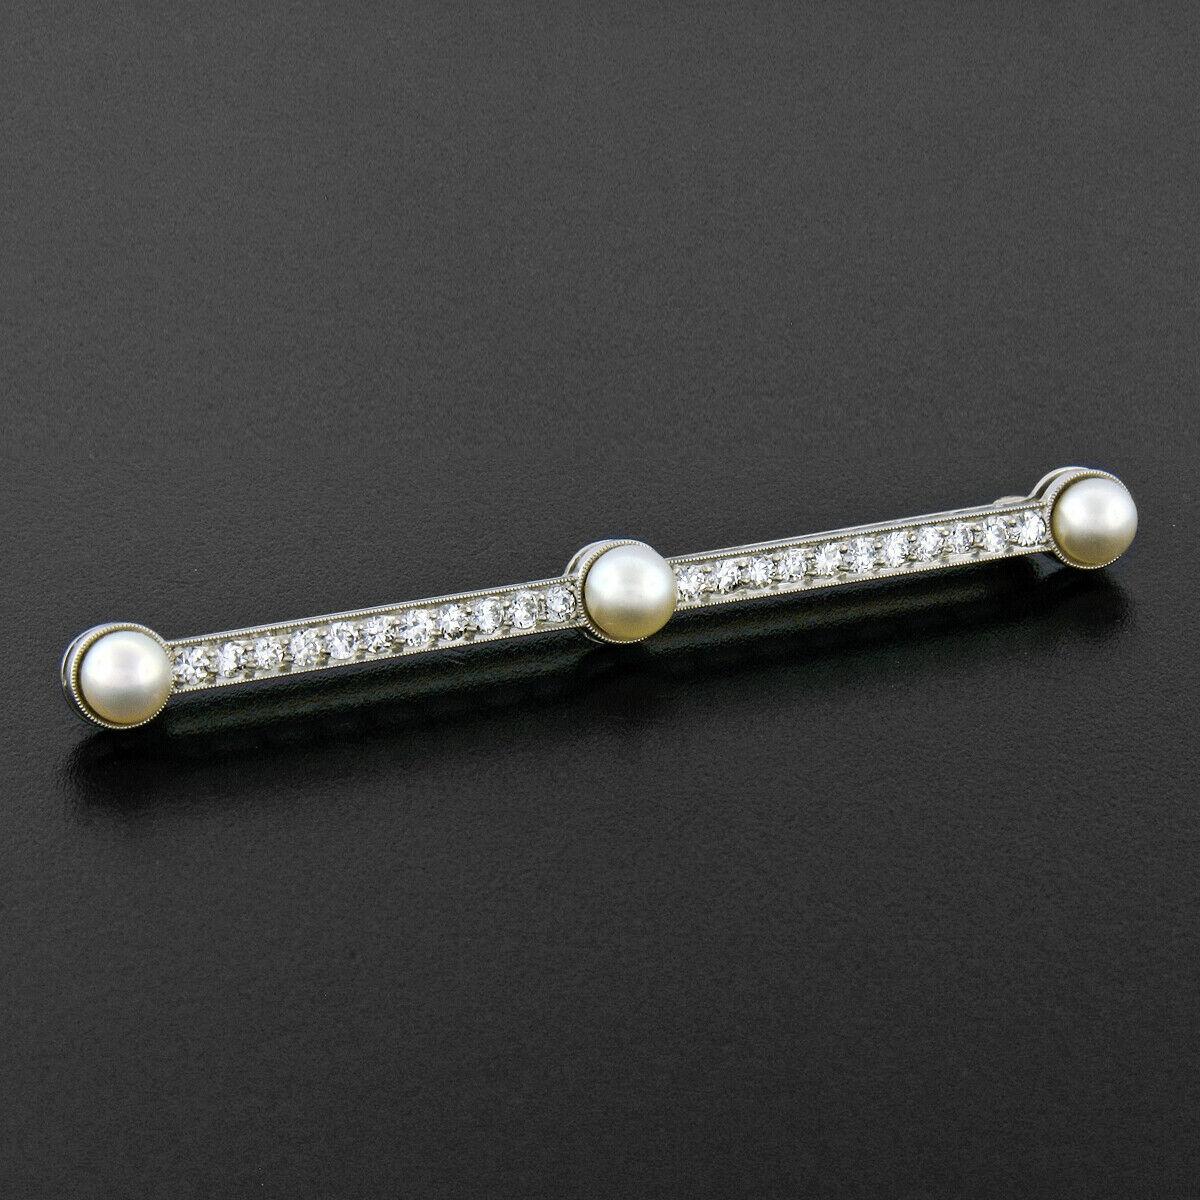 This magnificent, antique, Tiffany & Co. bar pin was crafted from solid .900 platinum and 14k yellow gold during the Edwardian era. The pin features 3 natural round pearls set into the center and at the ends. The remainder of the pin is pavé set